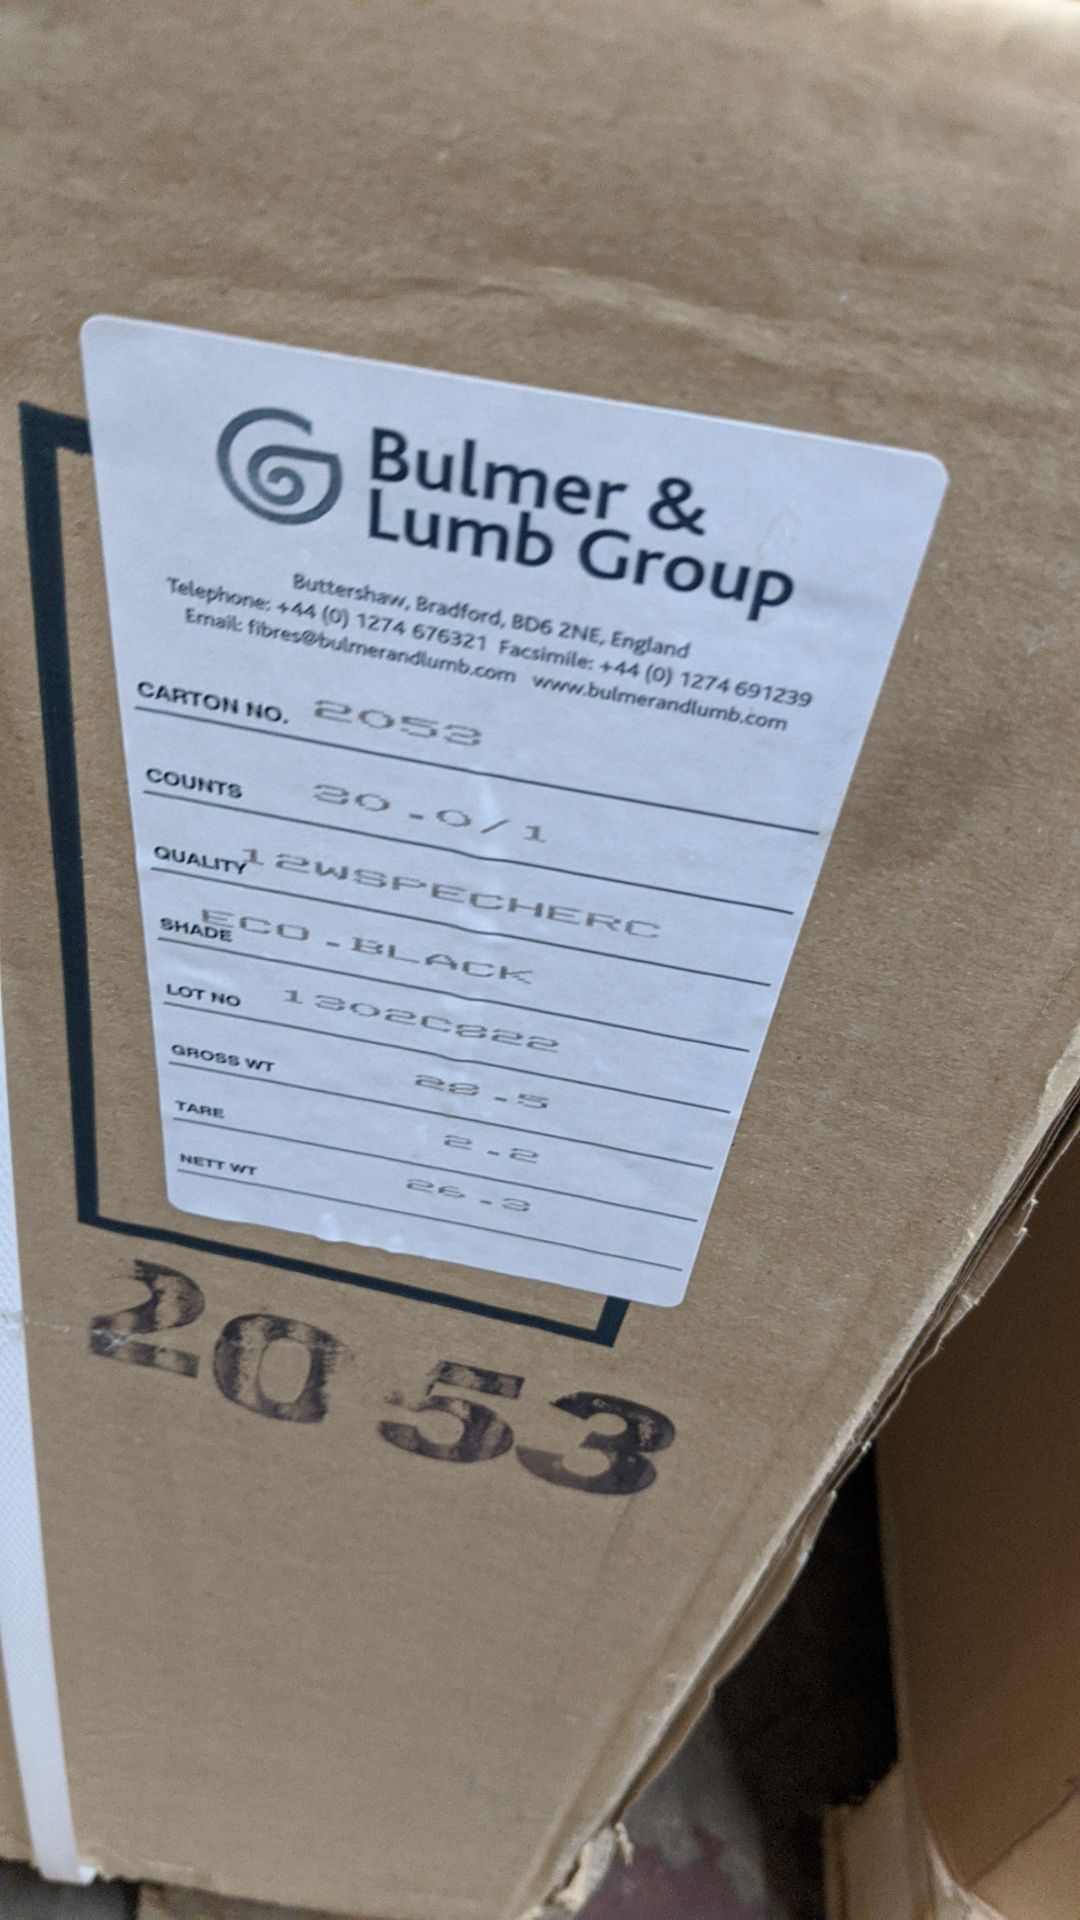 9 boxes of Bulmer & Lumb Group yarn, colour Eco.Black - see photos of labels on boxes for full - Image 7 of 9